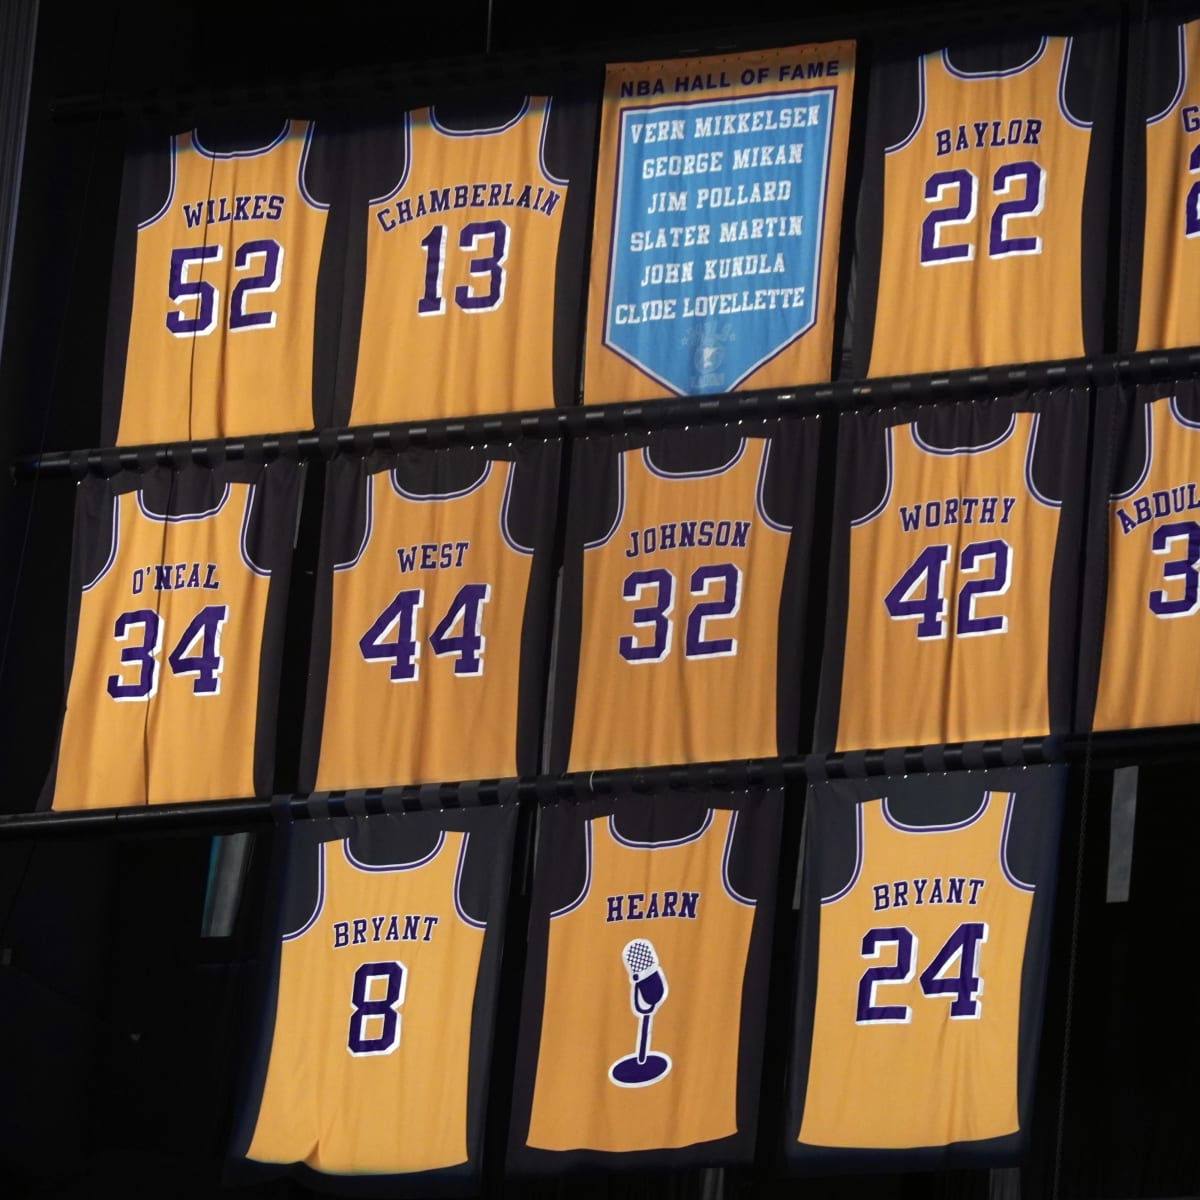 ﻿los angeles lakers jerseys over the years